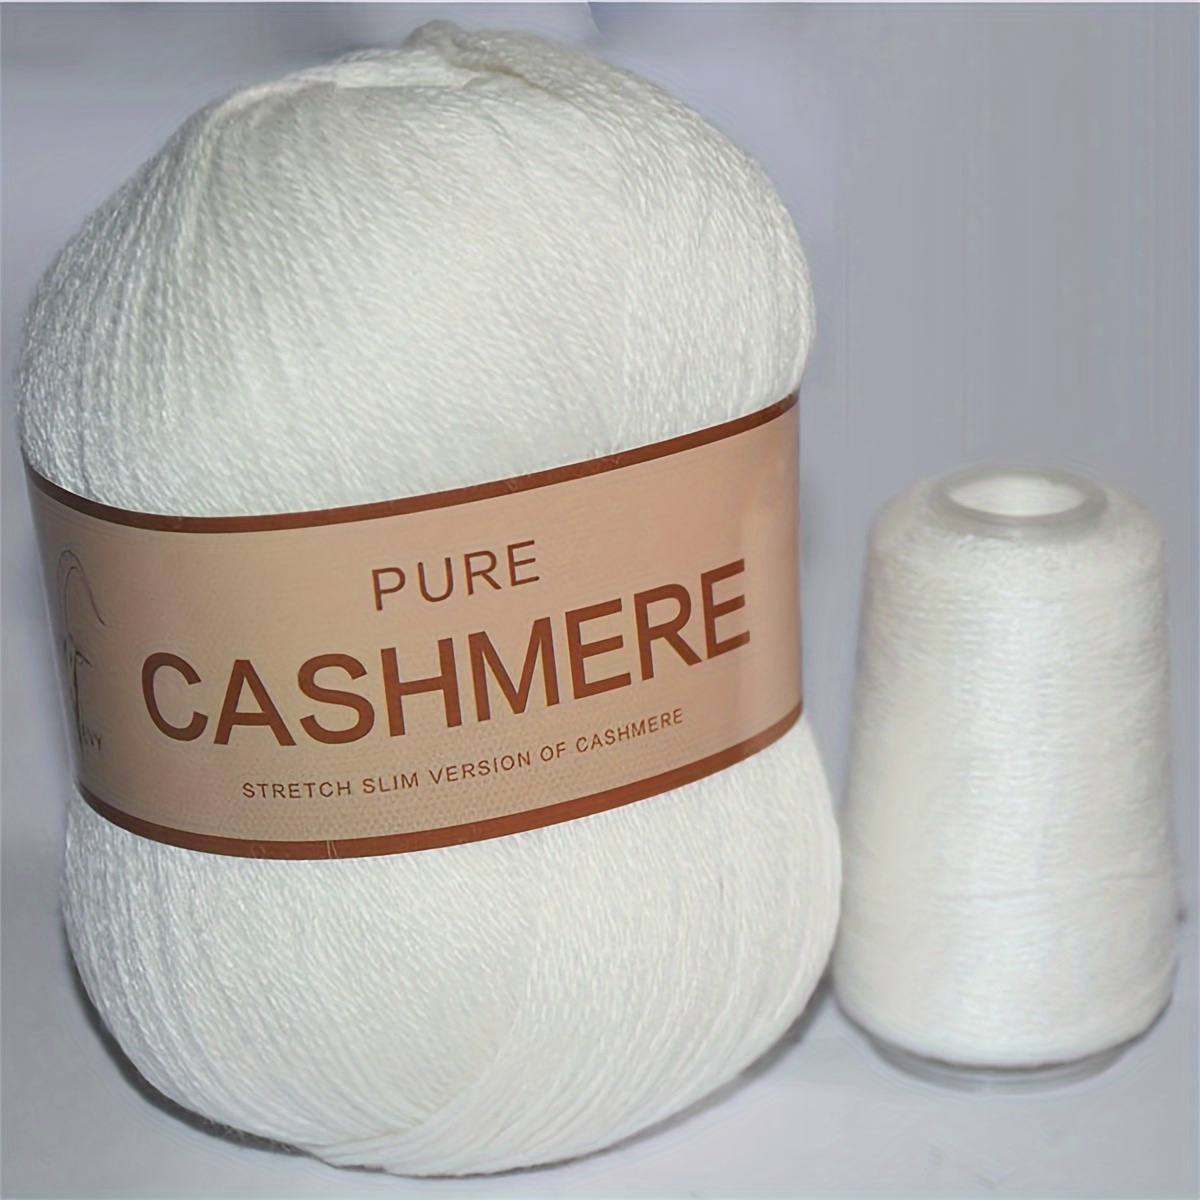 70 grams Best Quality Mongolian Cashmere Hand-knitted Cashmere